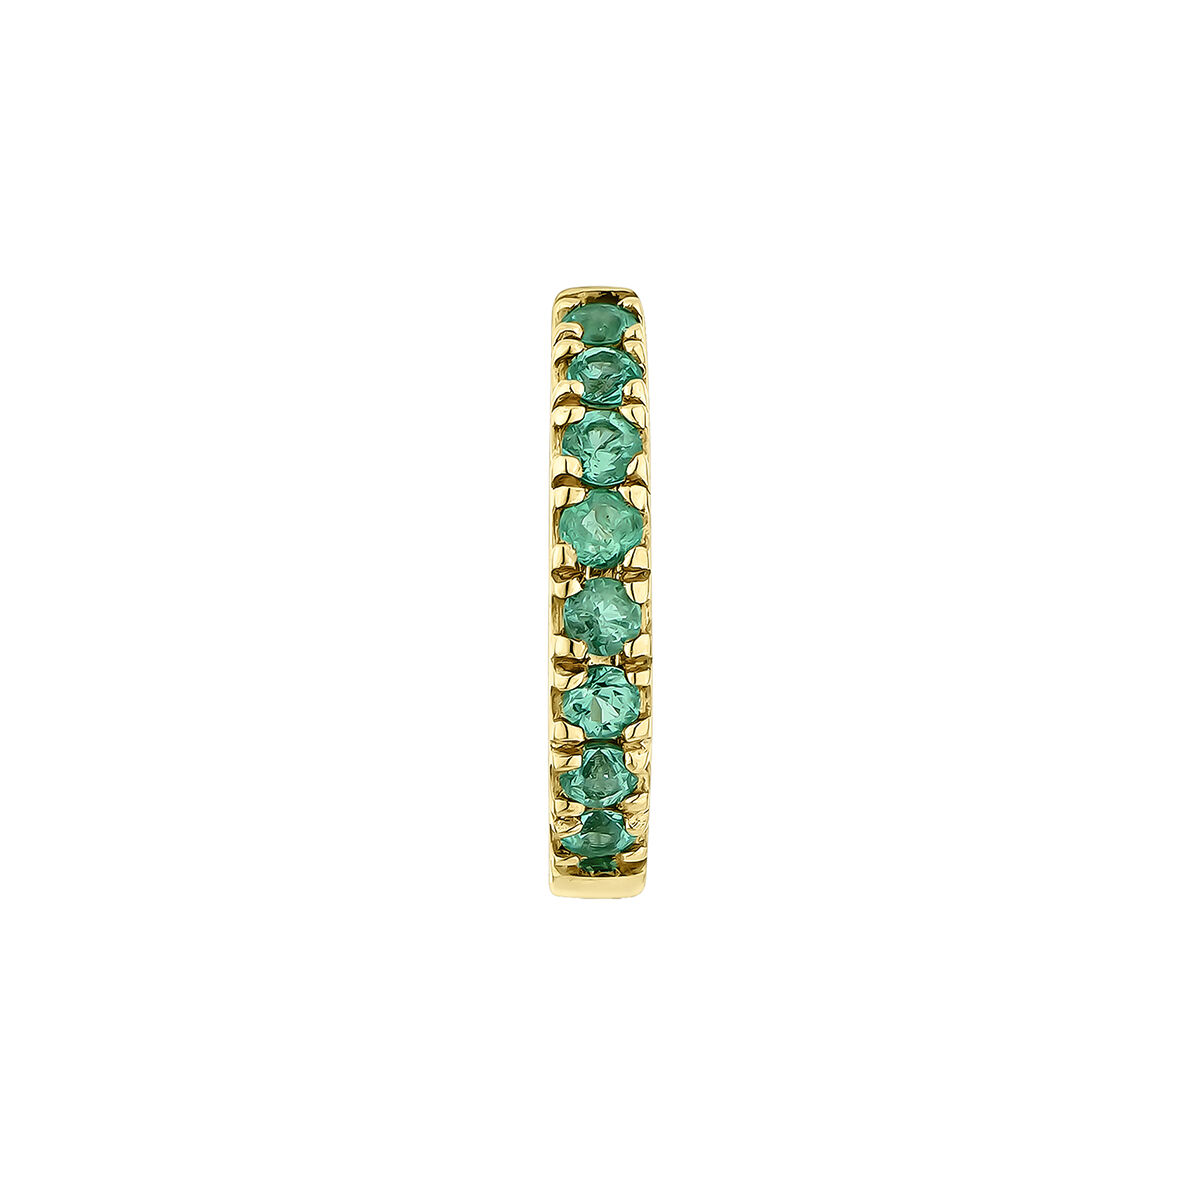 Single small hoop earring in 9k yellow gold with emeralds, J04970-02-EM-H, hi-res